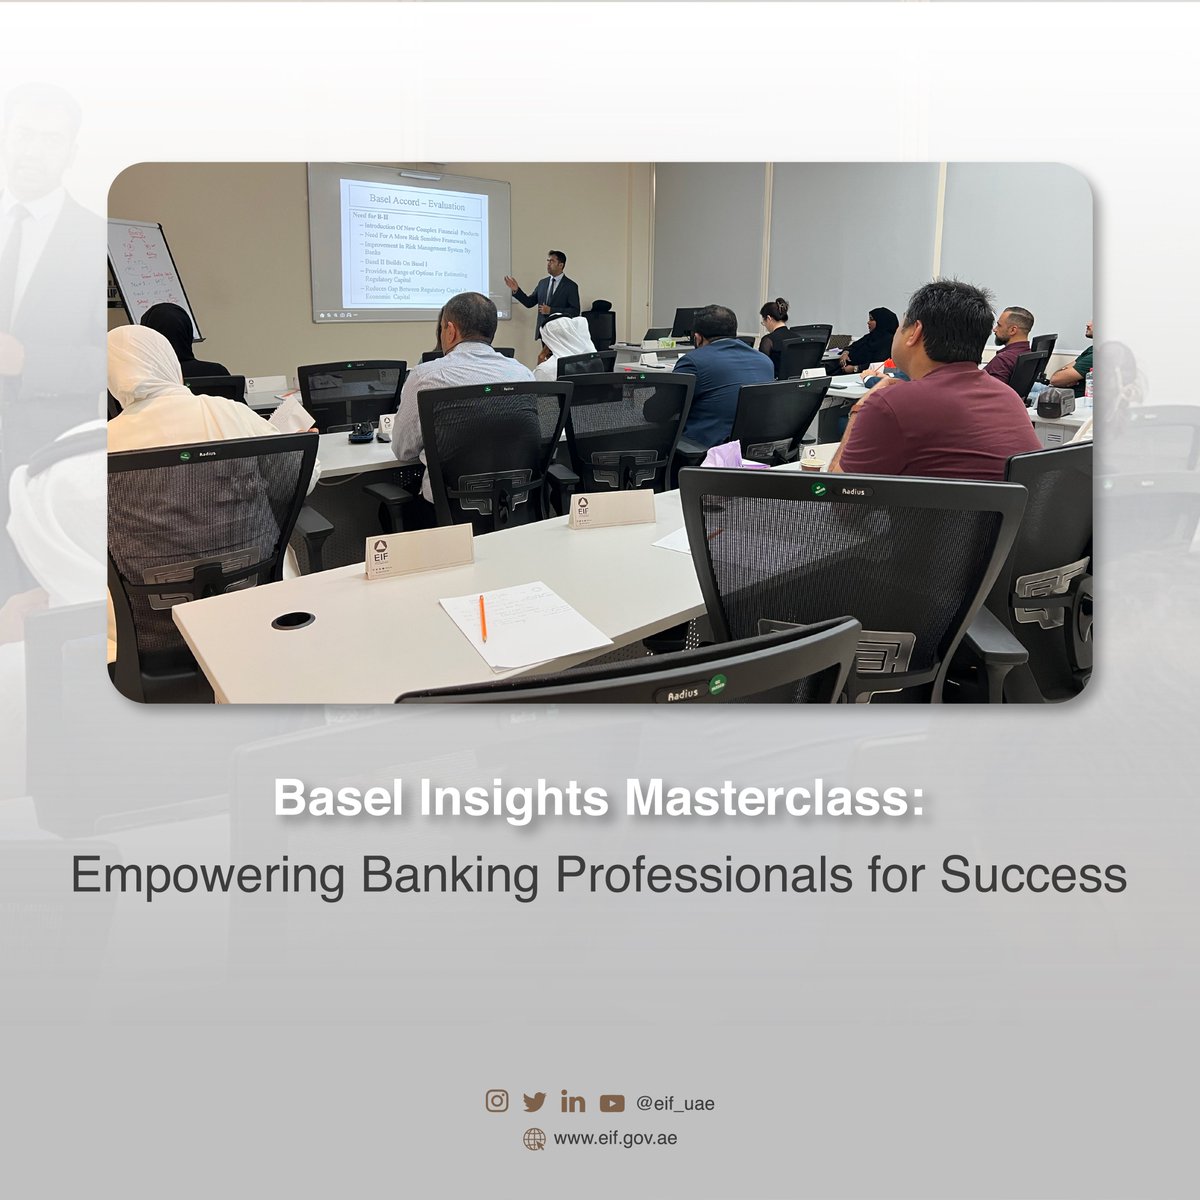 Witness the impactful moments from the Basel Insights Masterclass as EIF leads the way towards a future of financial excellence.  #EIF #FinanceLeaders #BaselInsightsMasterclass